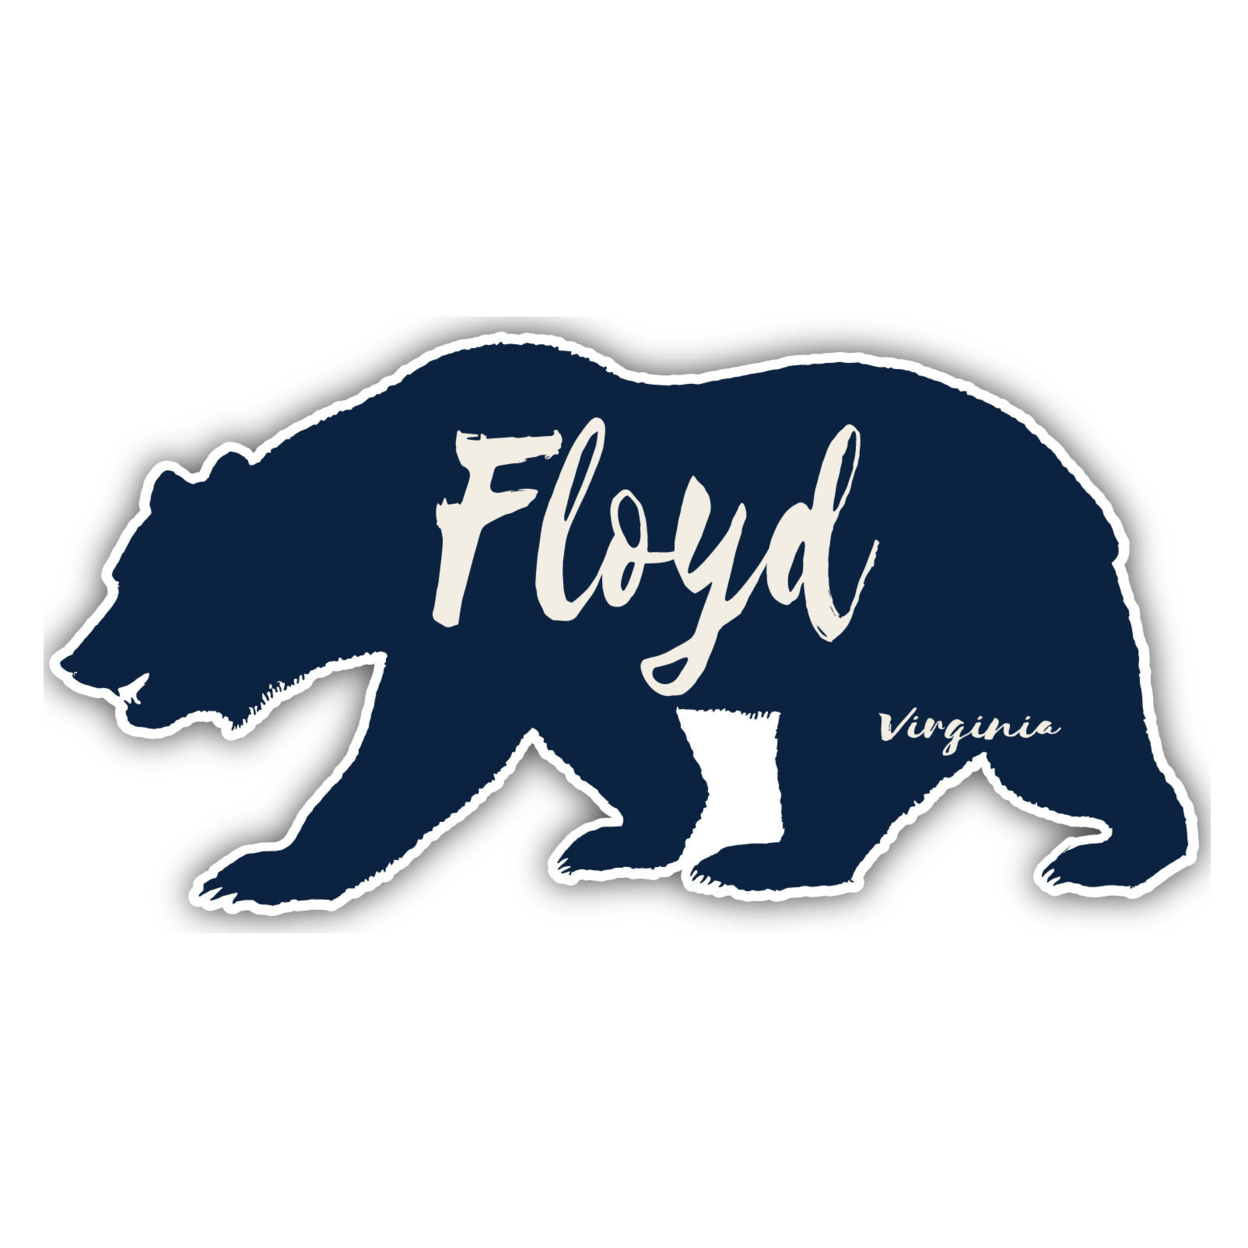 Floyd Virginia Souvenir Decorative Stickers (Choose Theme And Size) - Single Unit, 12-Inch, Great Outdoors